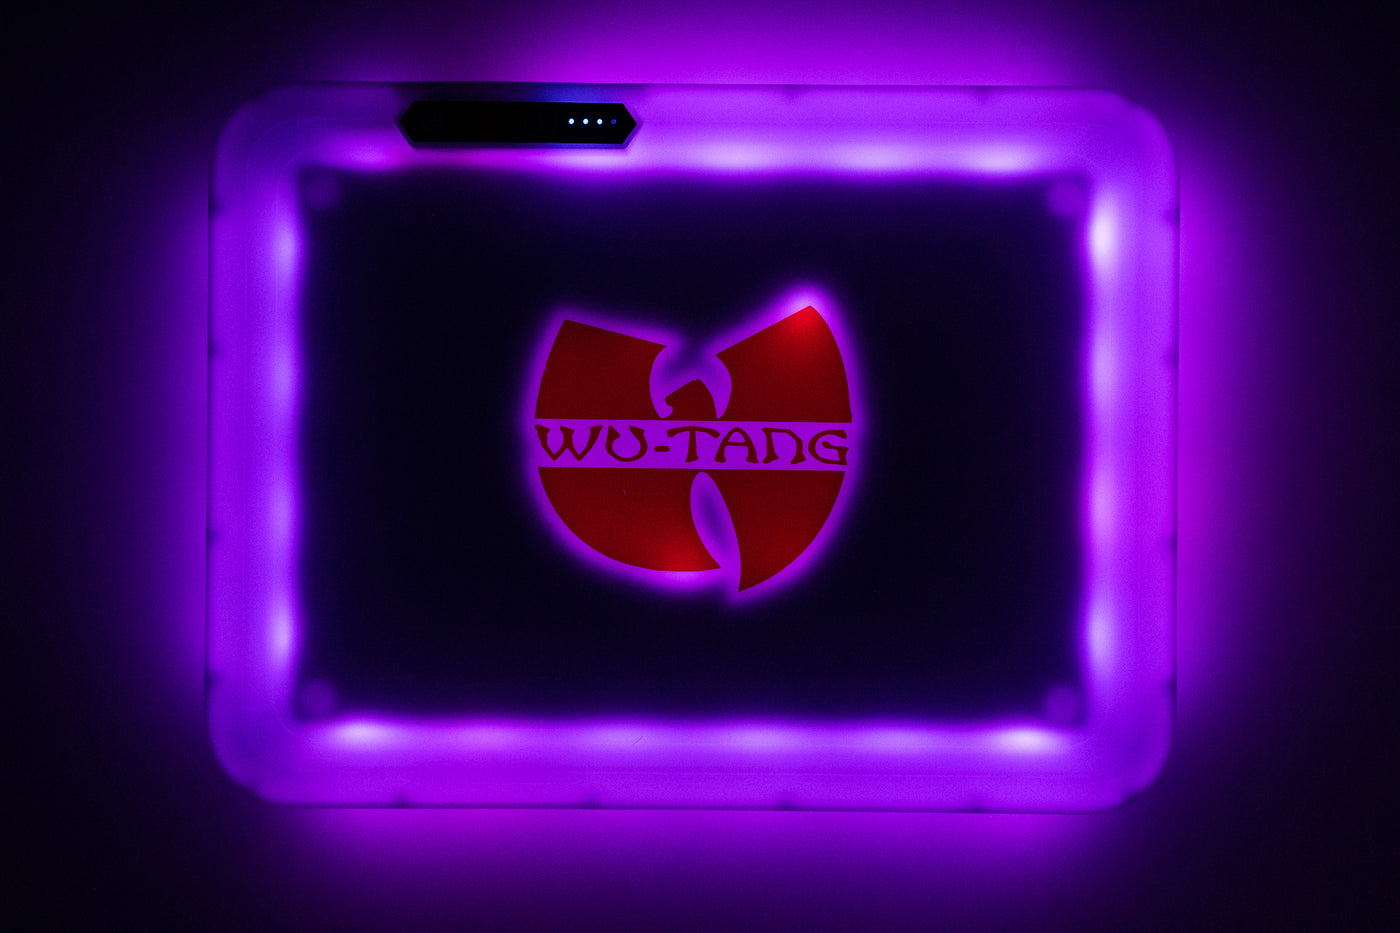 Image of Wu LED Rolling Tray in the color setting purple